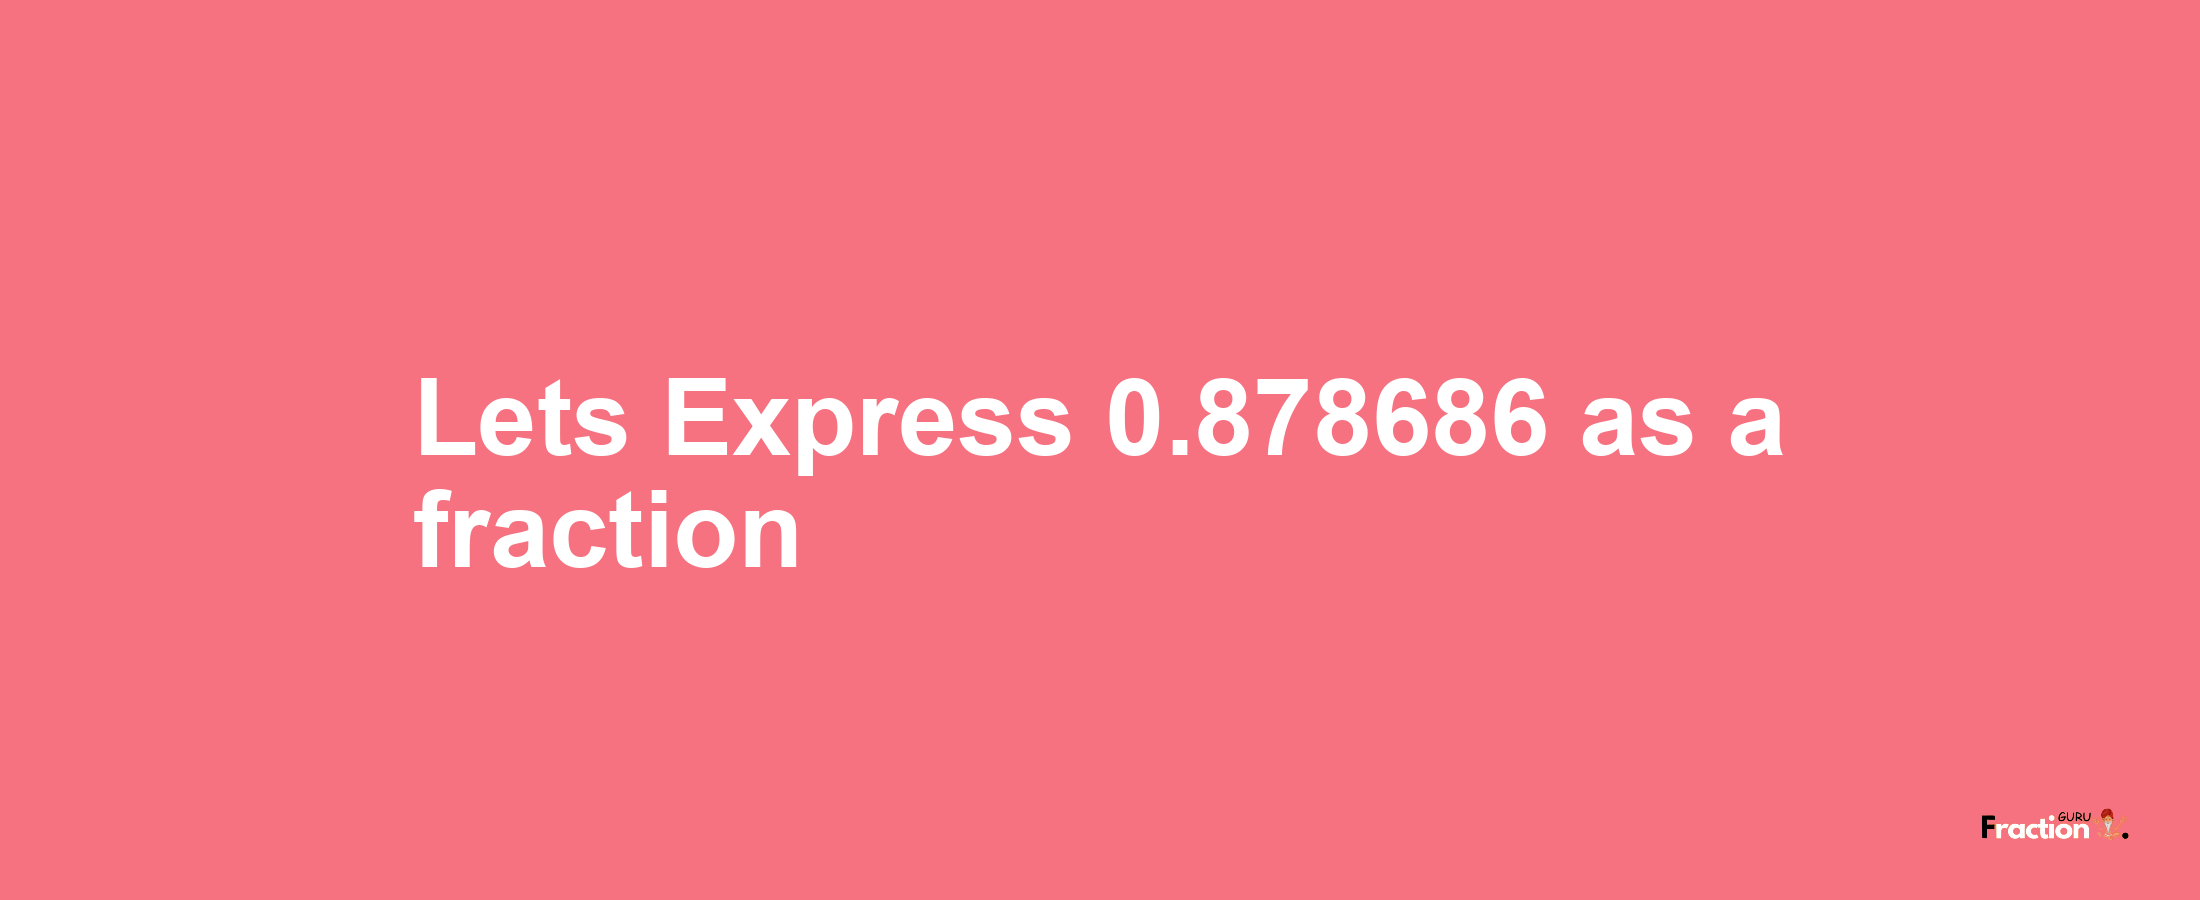 Lets Express 0.878686 as afraction